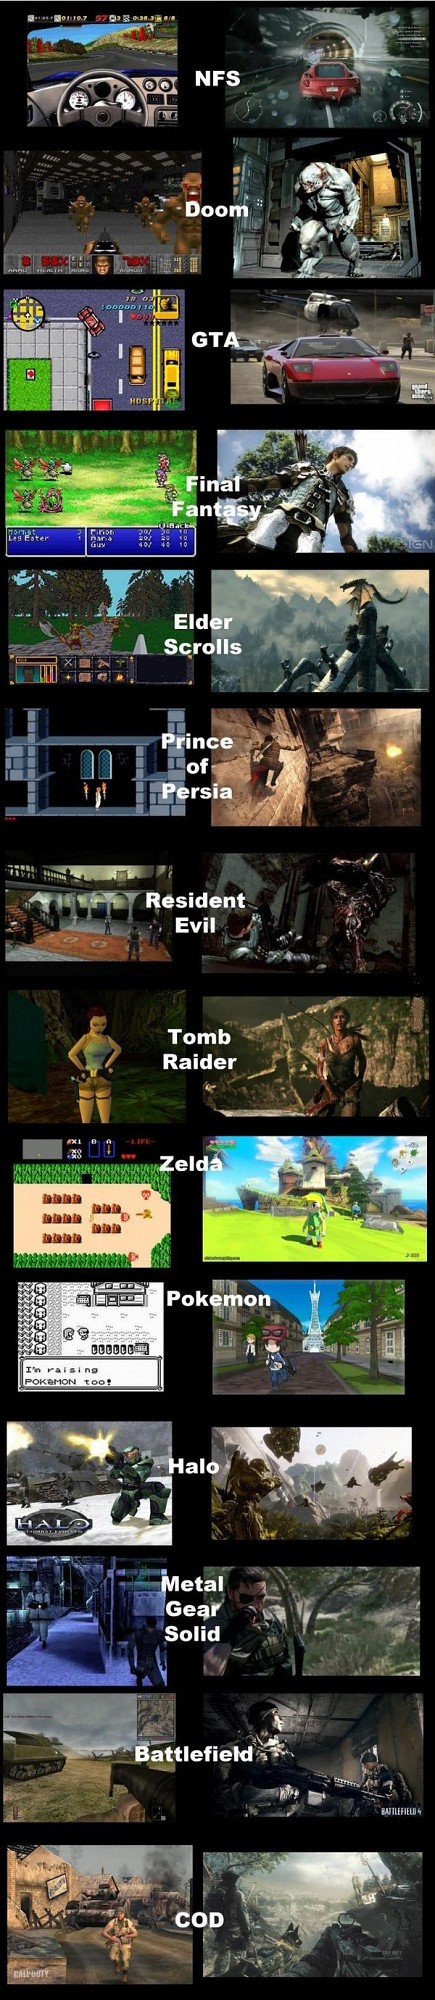 The Evolution of Video Game Graphics